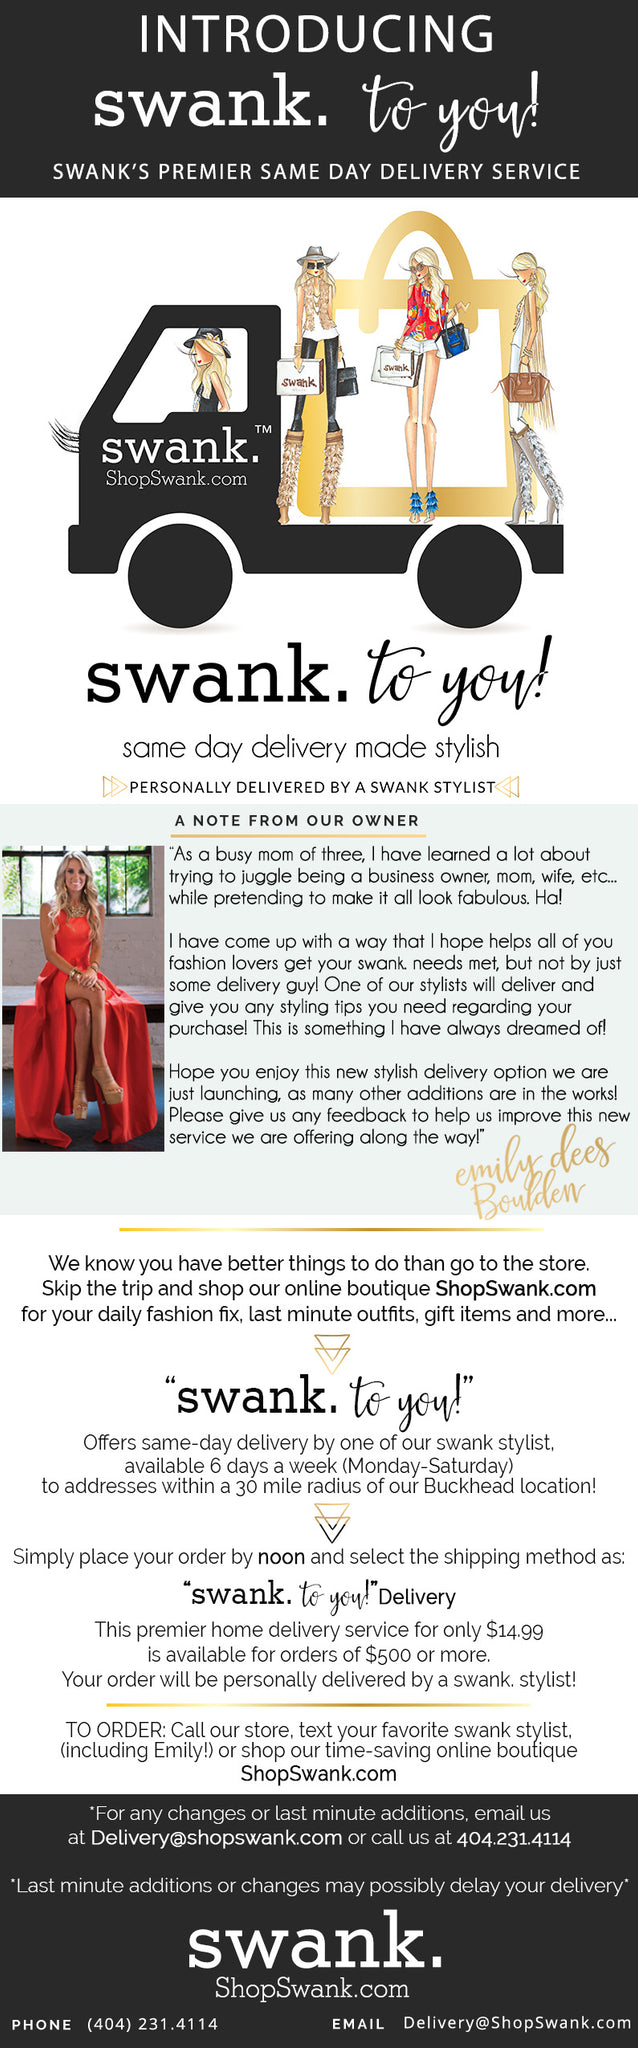 Introducing... swank. to you! Swank's premier same-day delivery service by a swank. stylist!